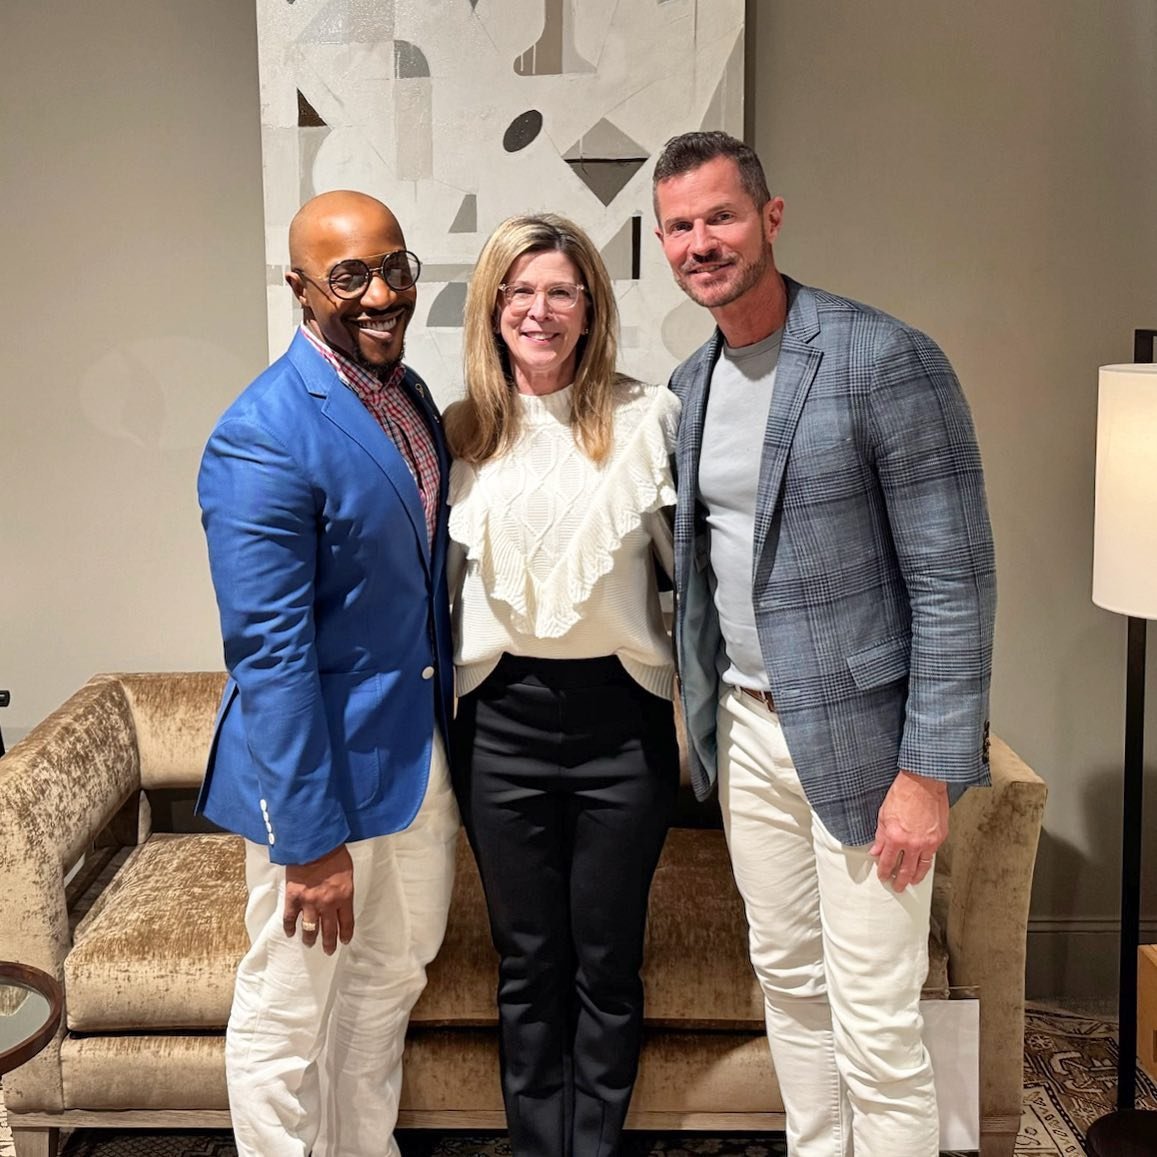 The incredibly talented @rayboothdesign and @coreydamenjenkins! An absolute pleasure to see you both again!

#coreydamenjenkins #interiordesign #hickorychair #hickorychairfurniture #highpointmarket #interiordesign #classicstyle #raybooth #rayboothdes